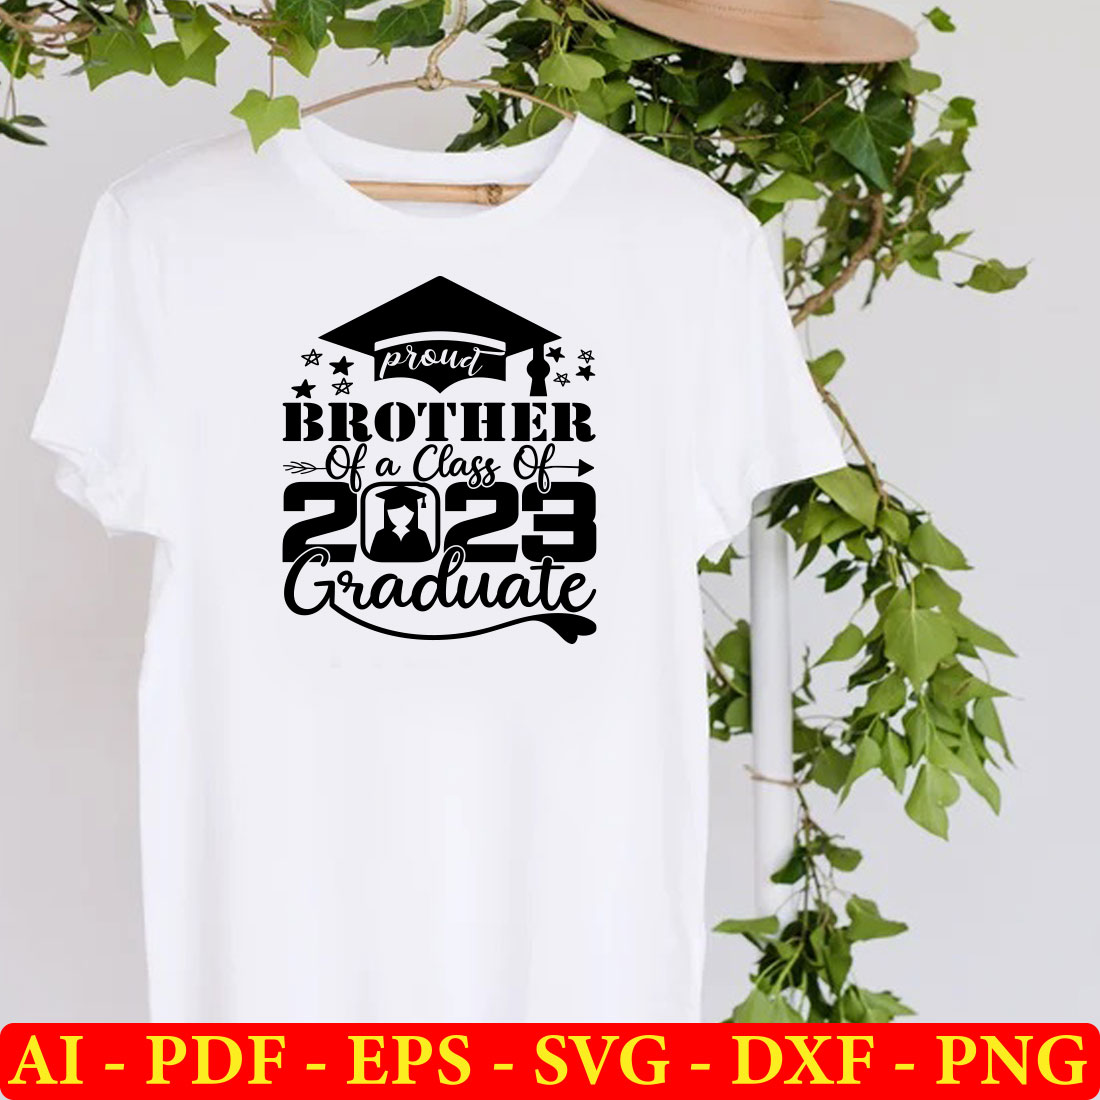 T - shirt that says brother of a class of 2013 graduate.